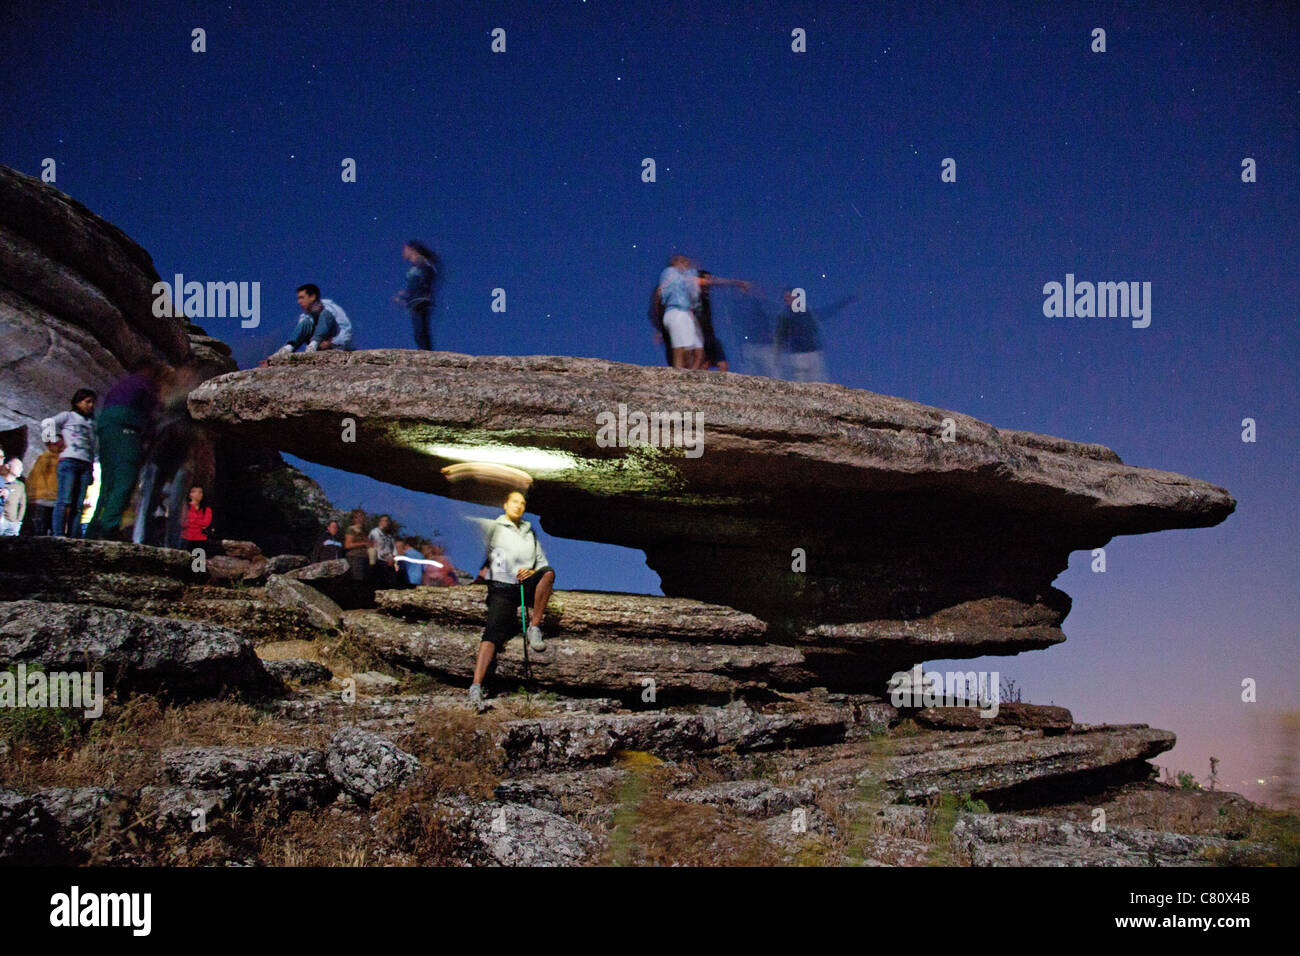 Hikers in a moonlit night Natural Park El Torcal Antequera Malaga Andalusia Spain Stock Photo